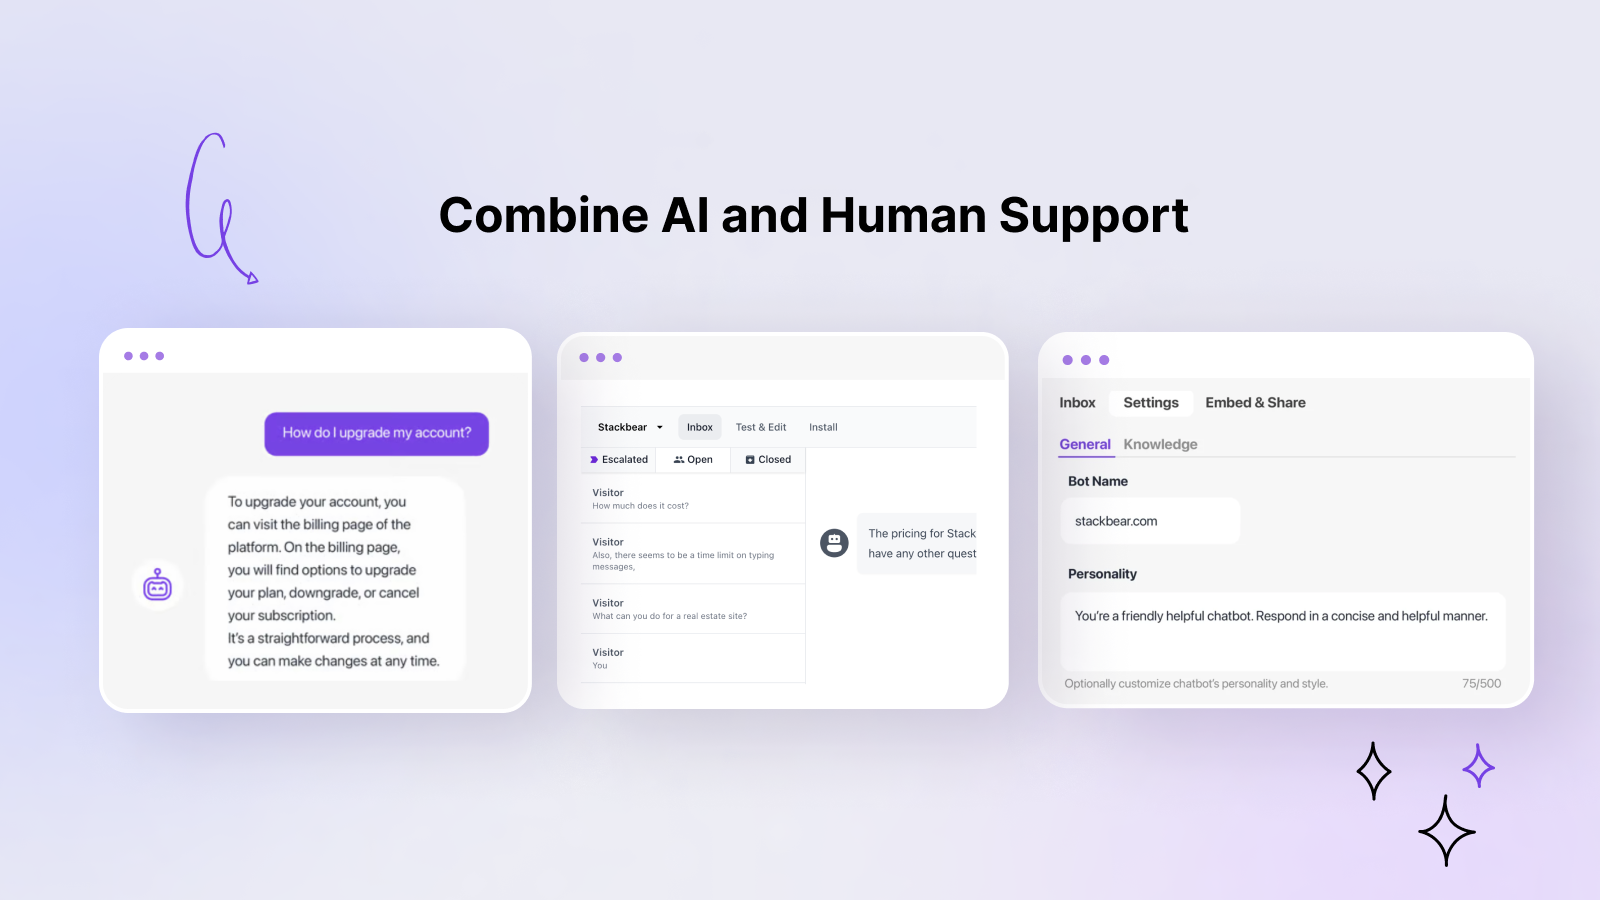 Combine AI and Human Support